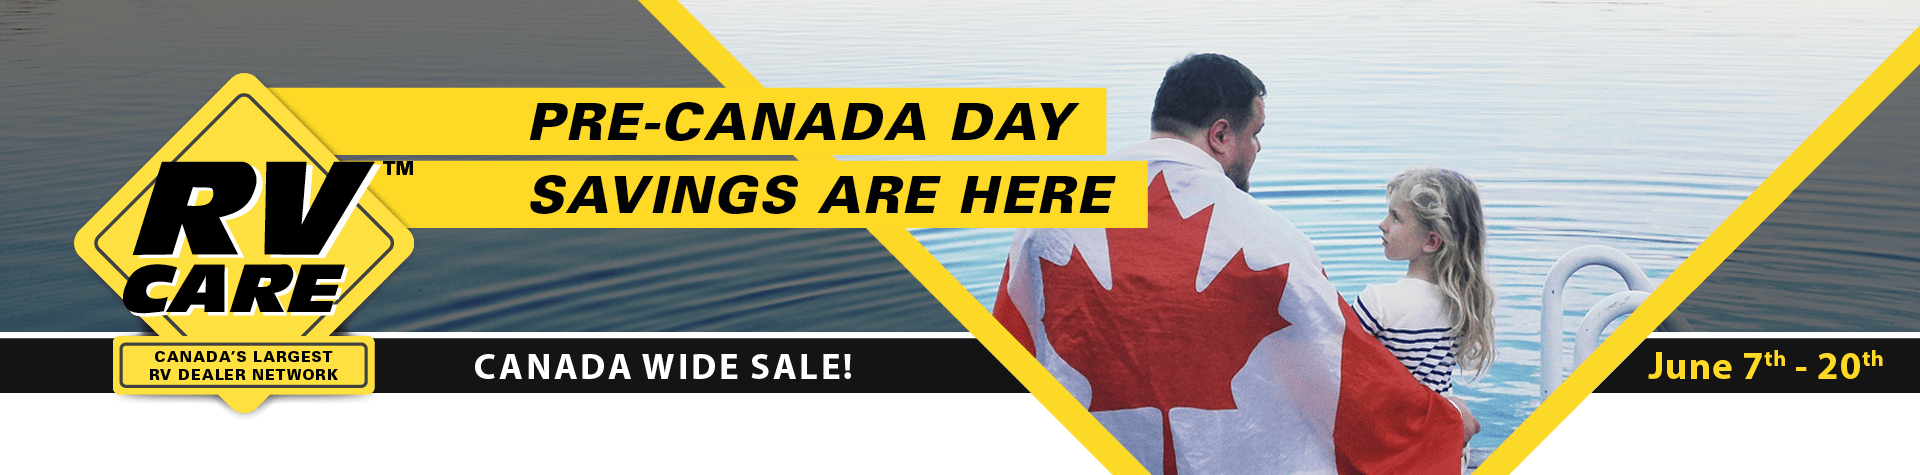 Pre-Canada Day Savings are HERE!!